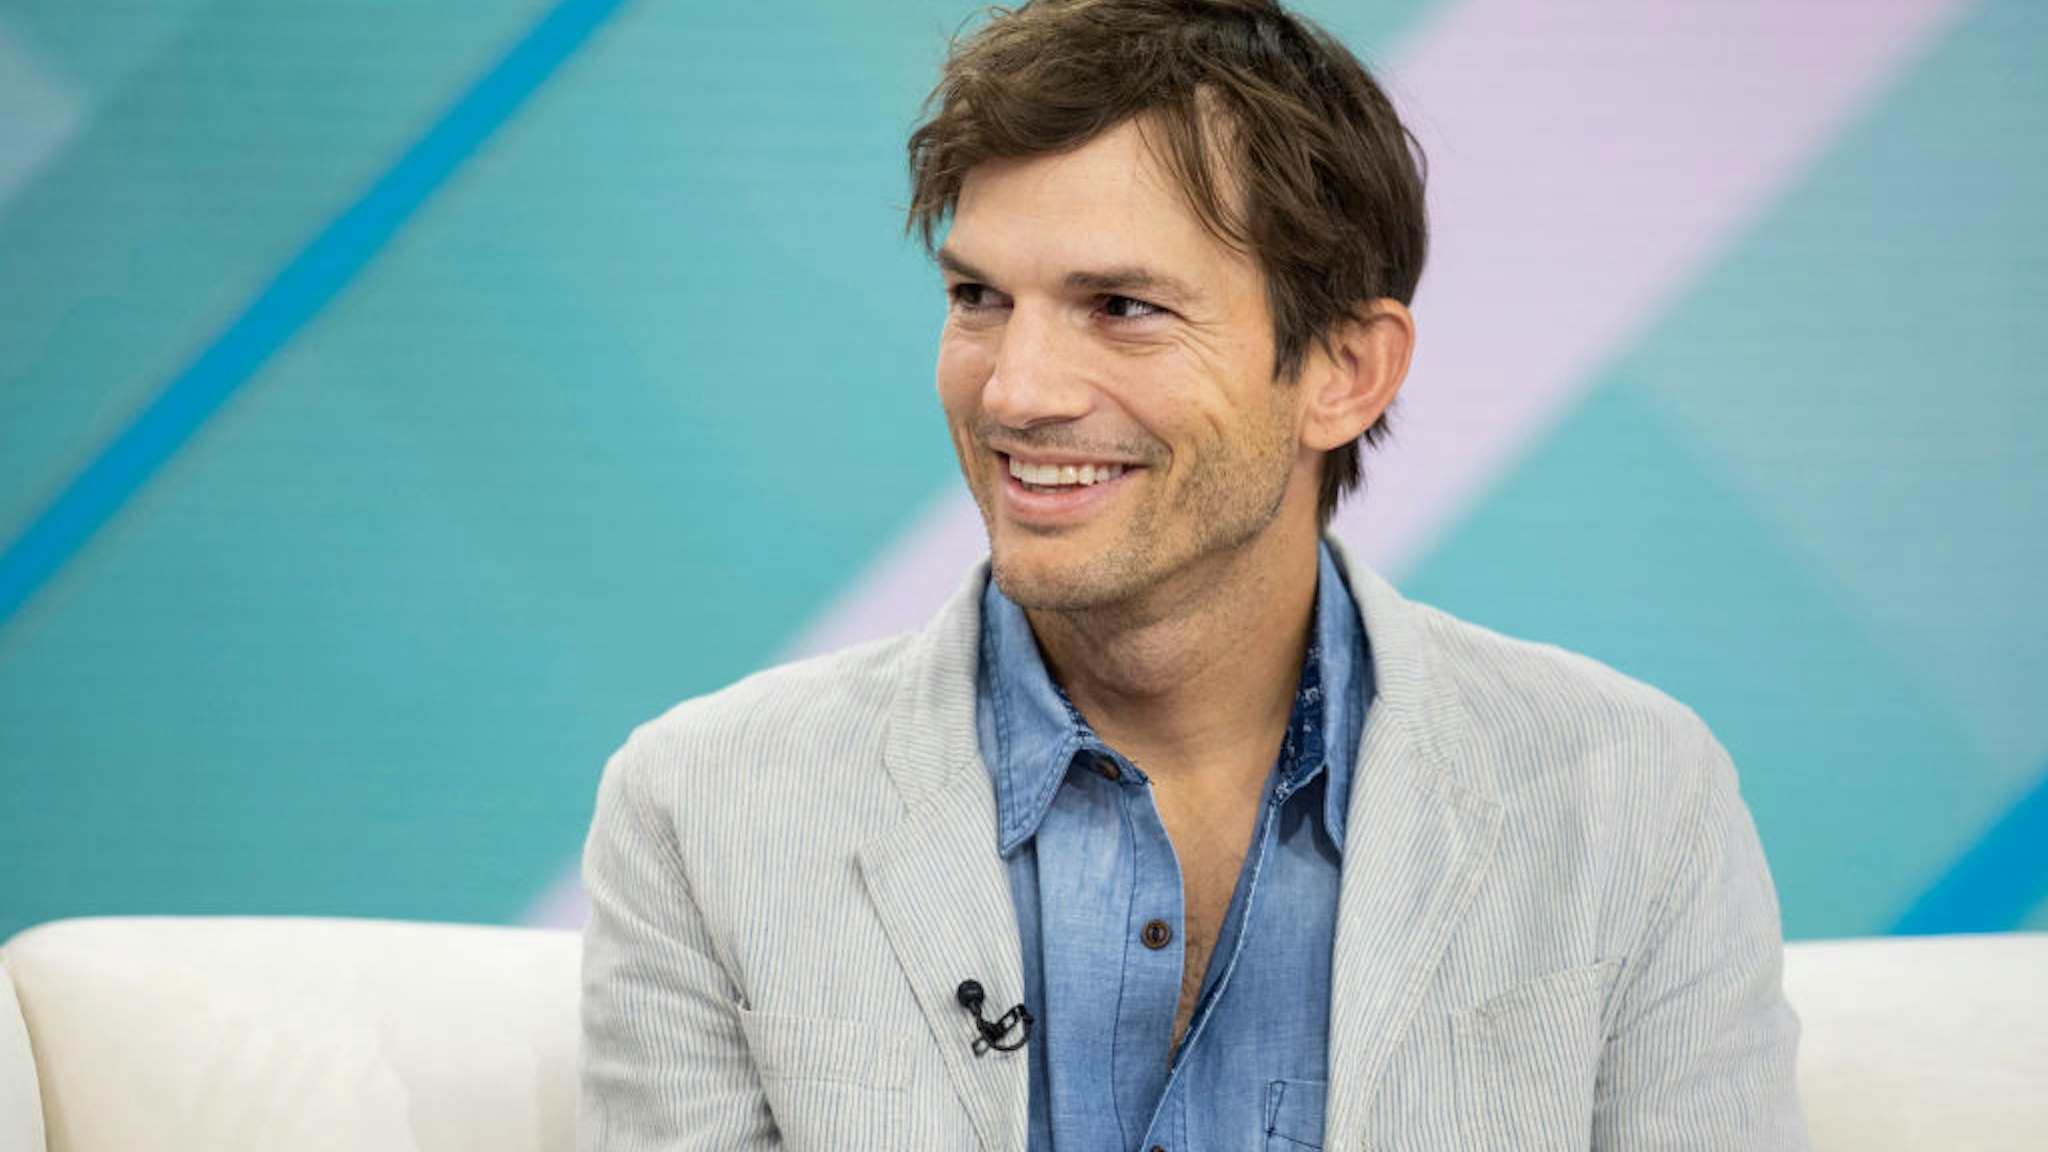 TODAY -- Pictured: Ashton Kutcher on Friday, November 4, 2022 -- (Photo by: Nathan Congleton/NBC via Getty Images)